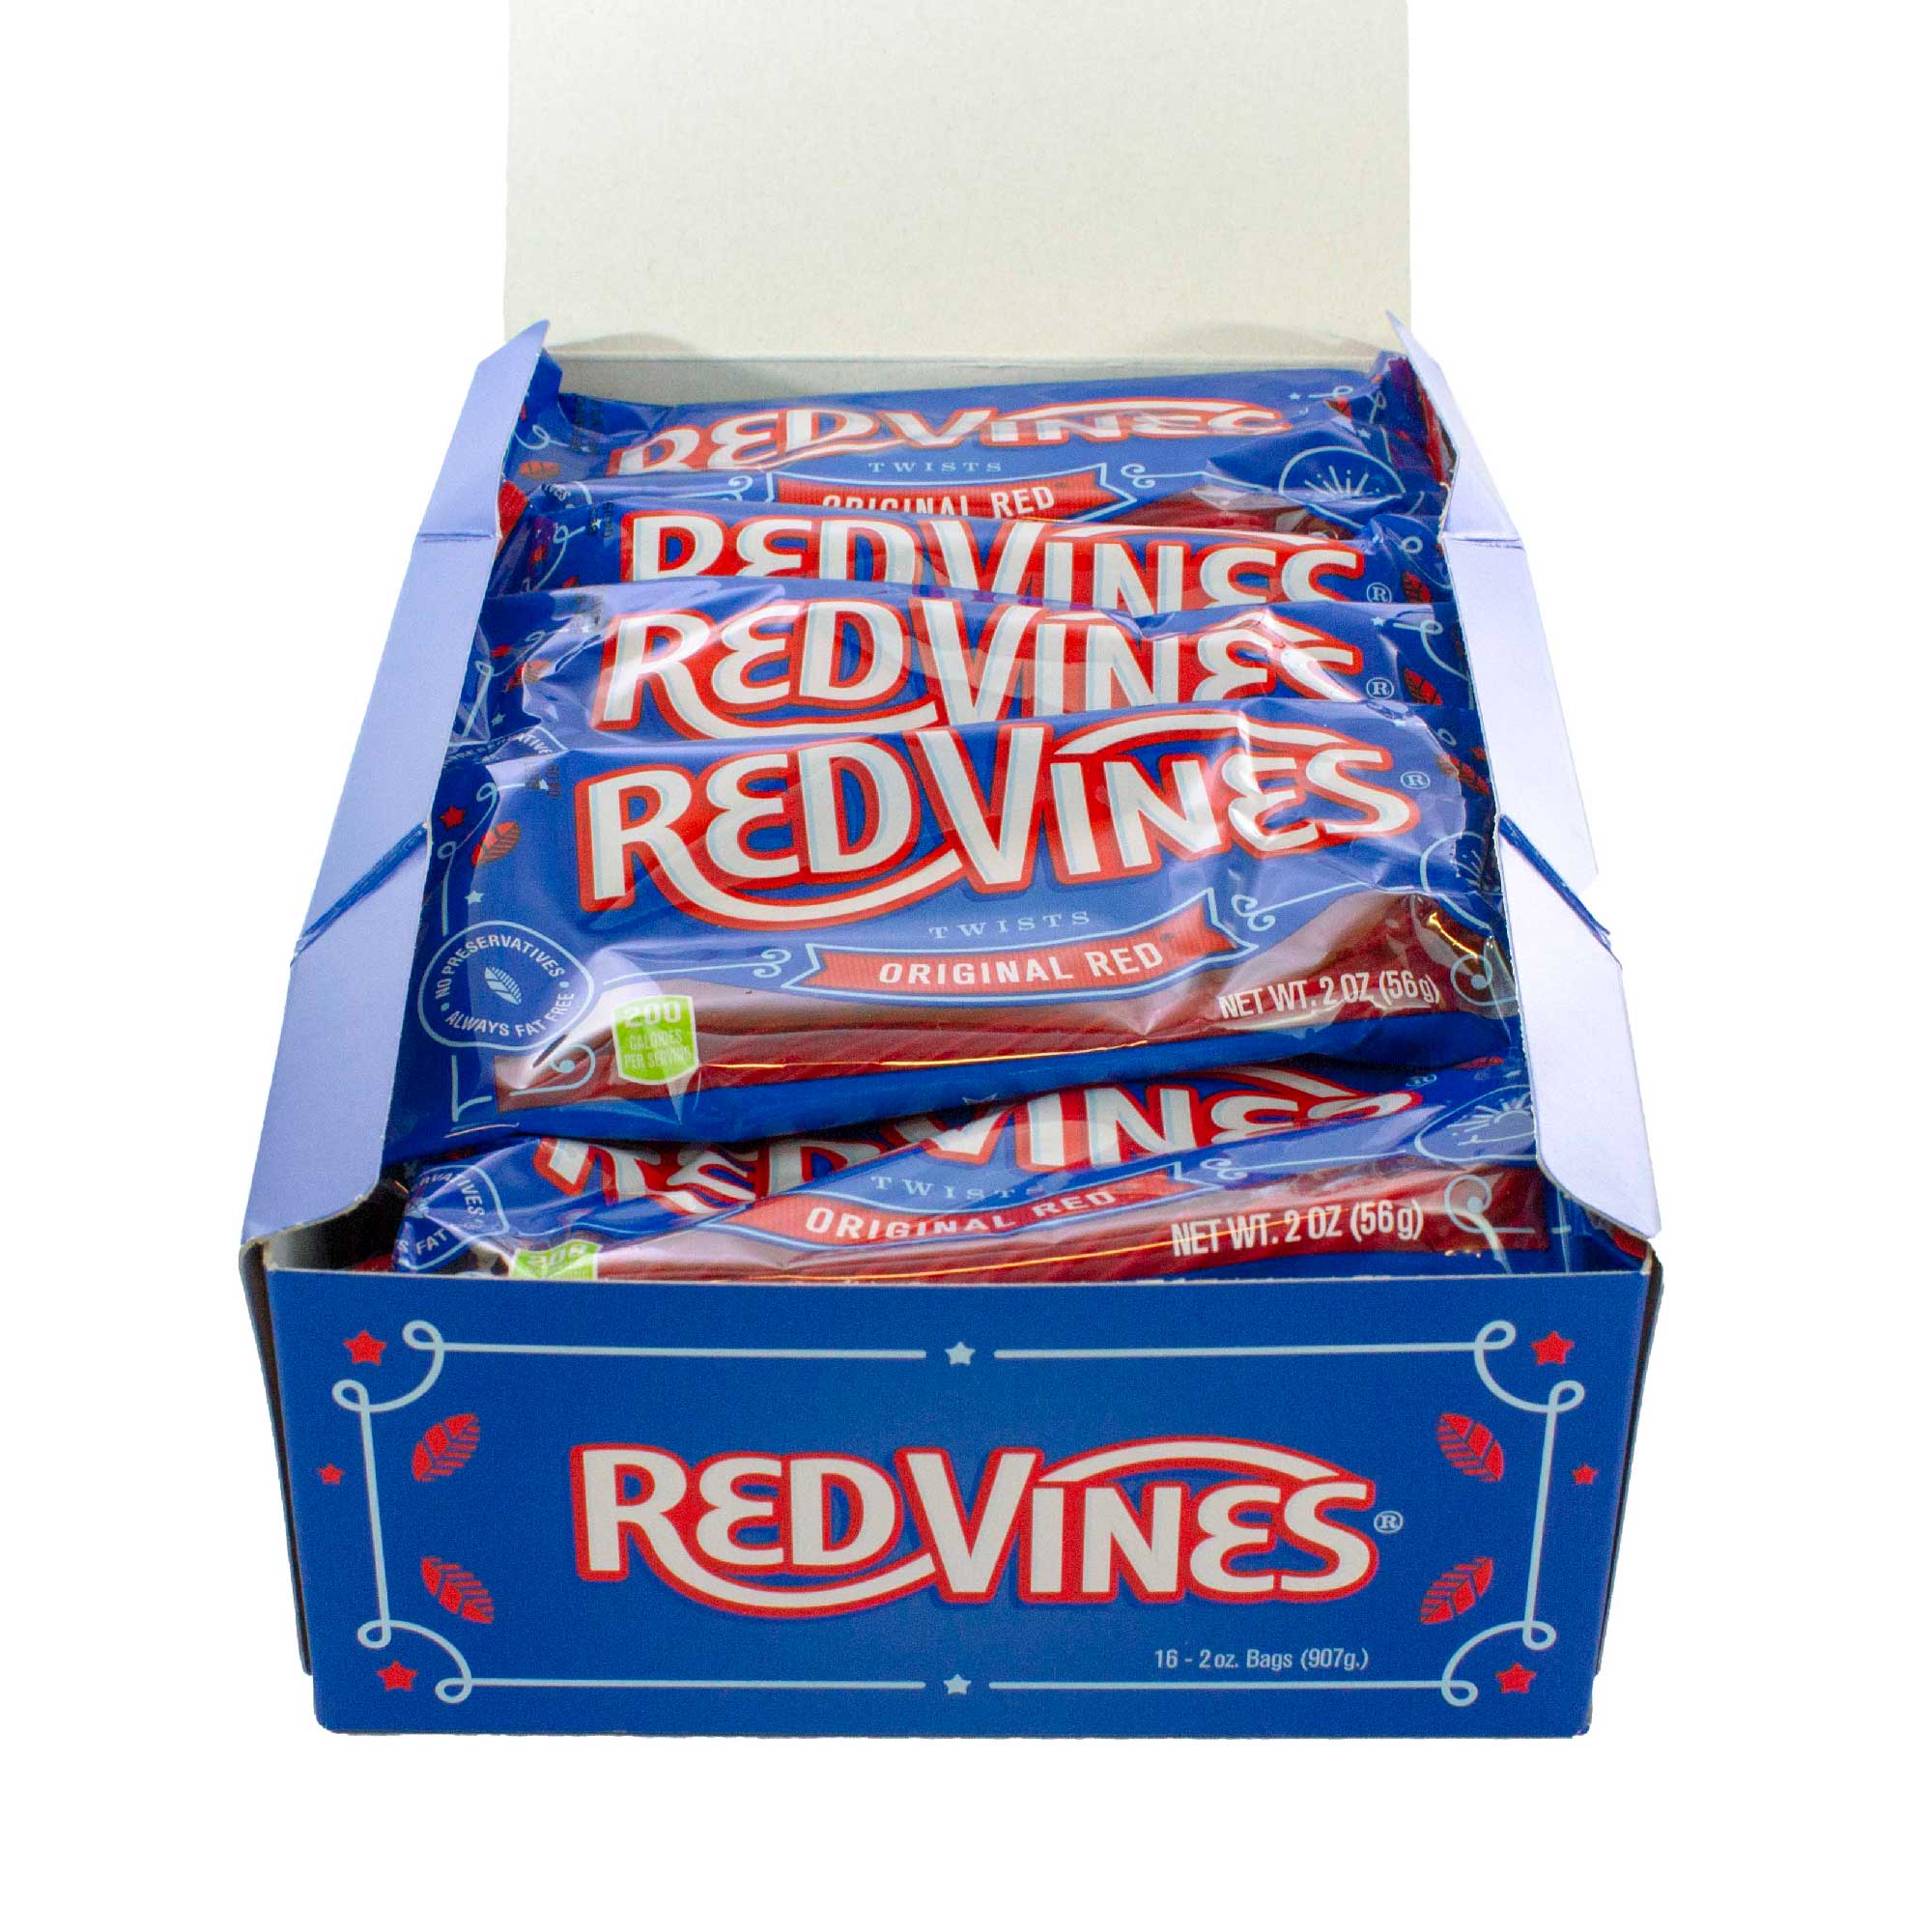 Red Vines Original Red® Chewy Licorice Twists 2oz Bags